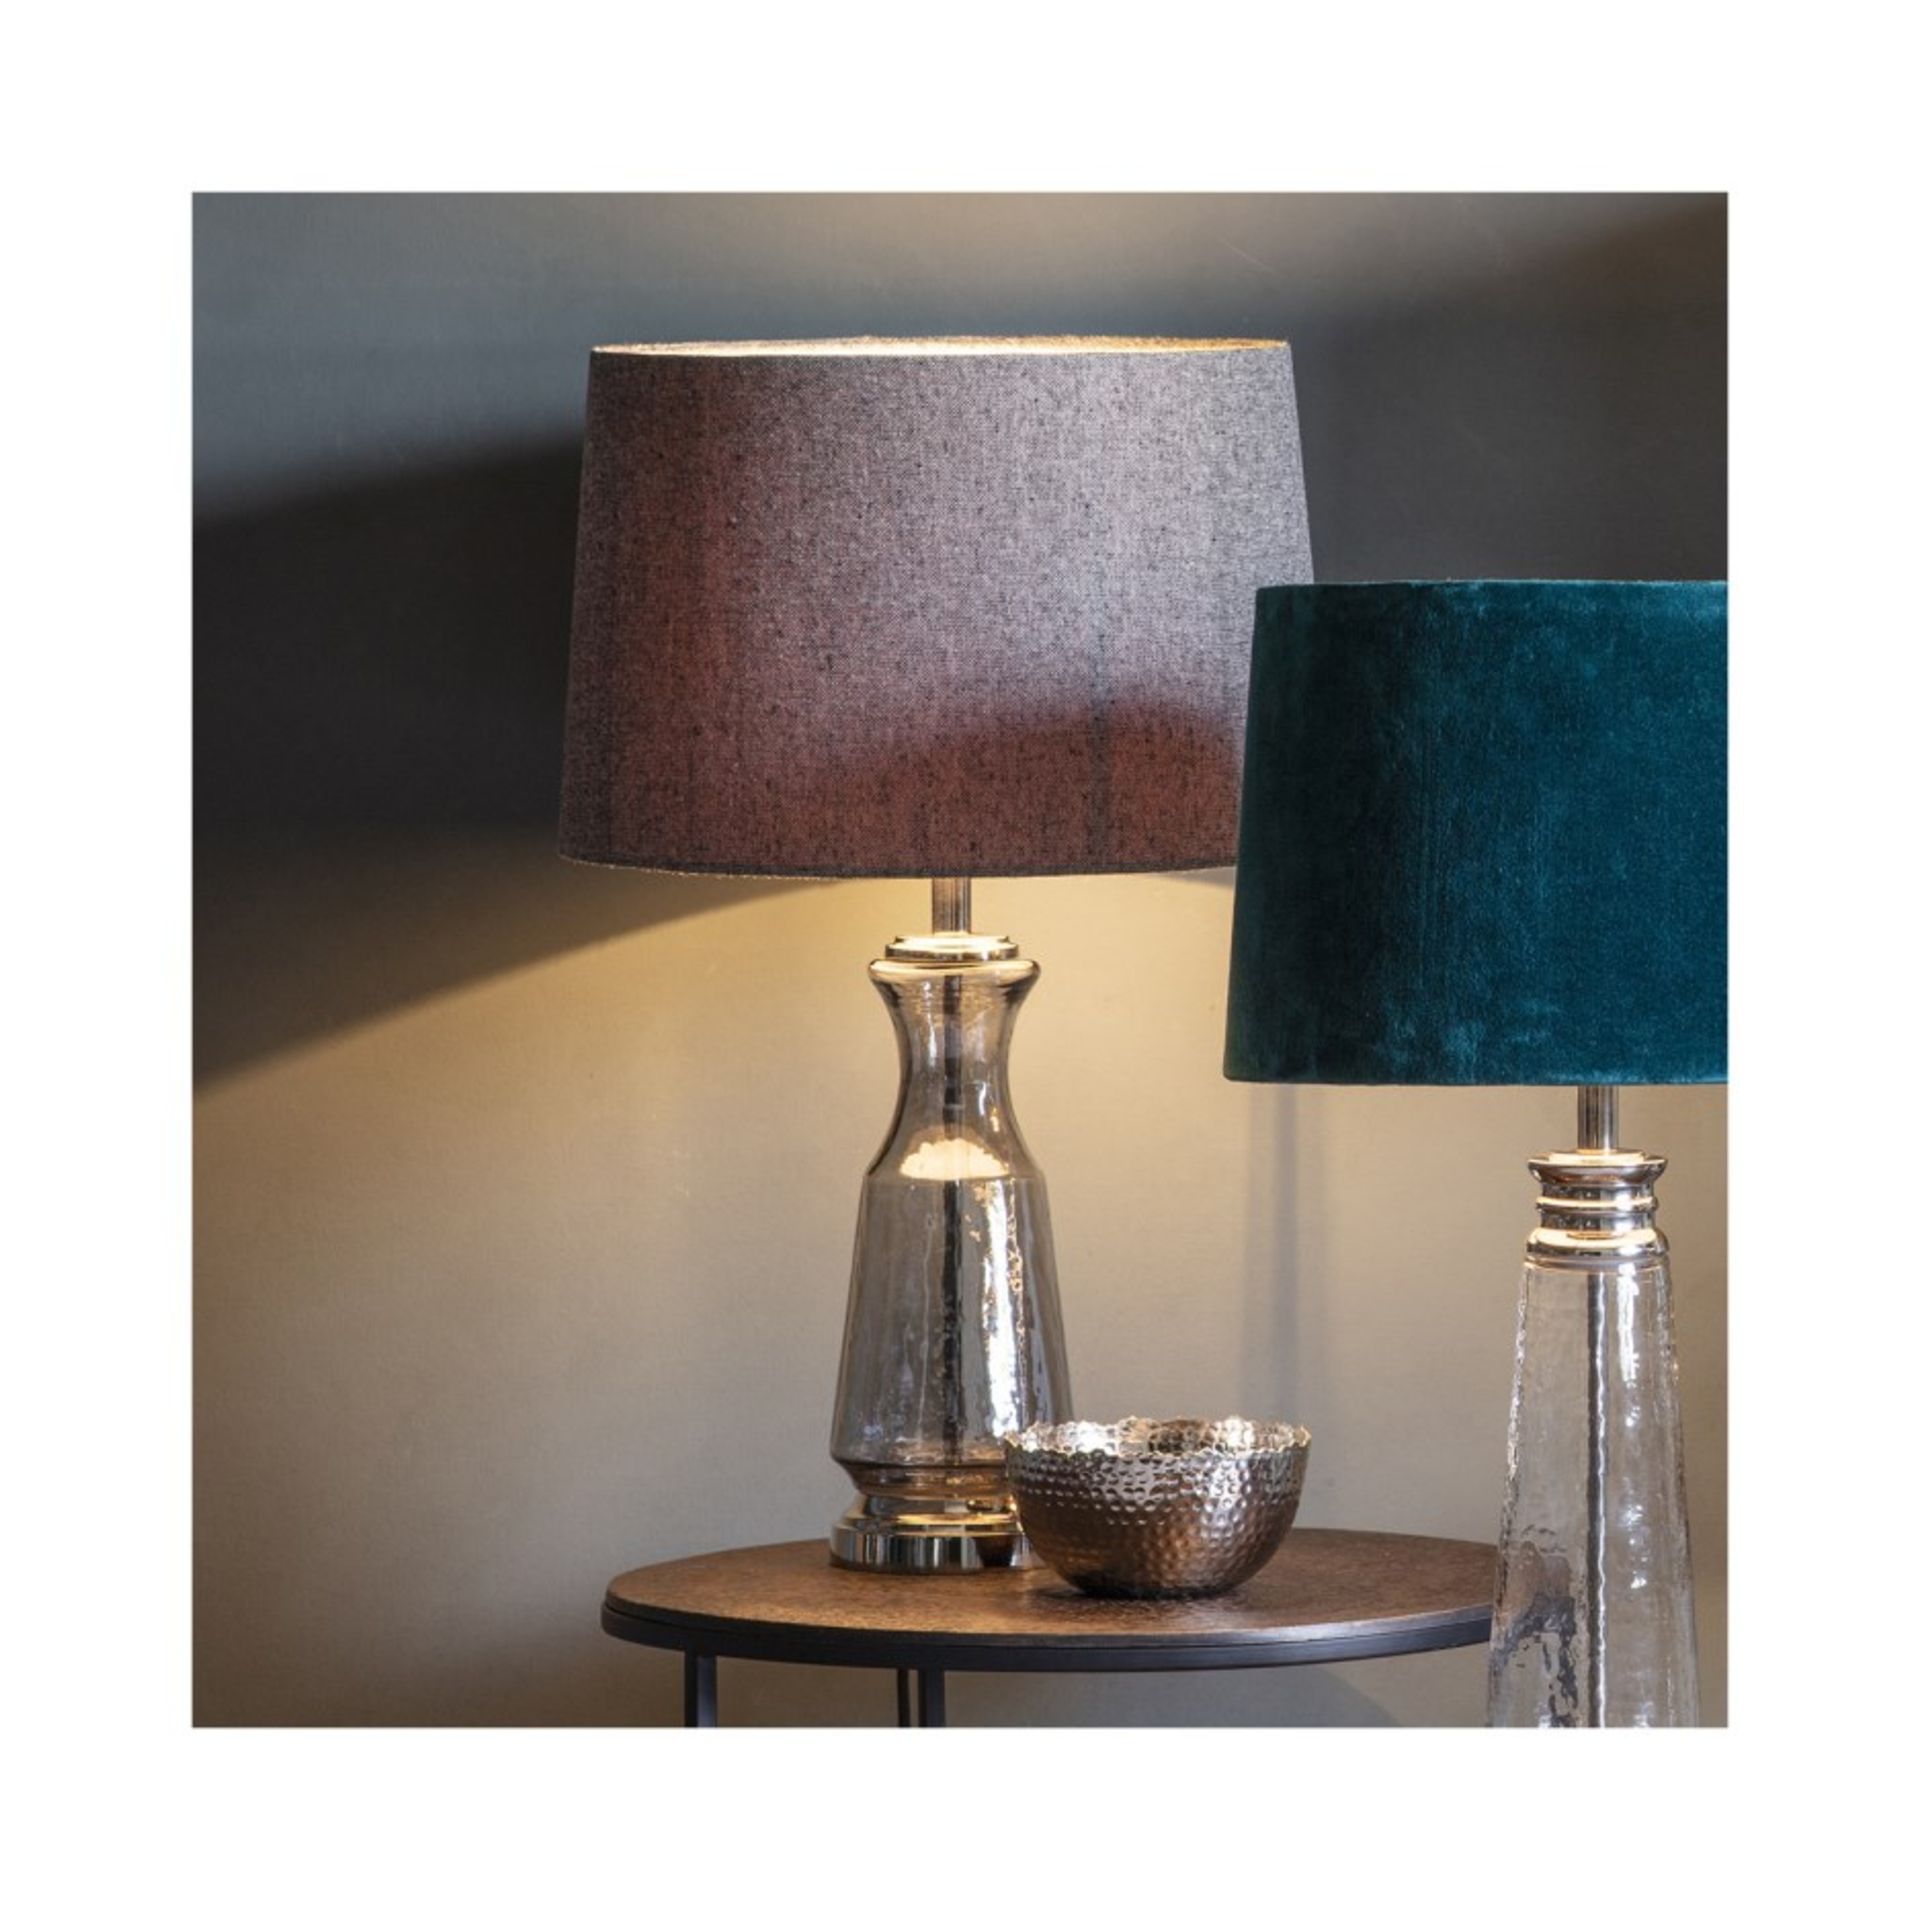 Lastrea table lamp a stunning glass based lamp with silver detailing, supplied with a grey shade.